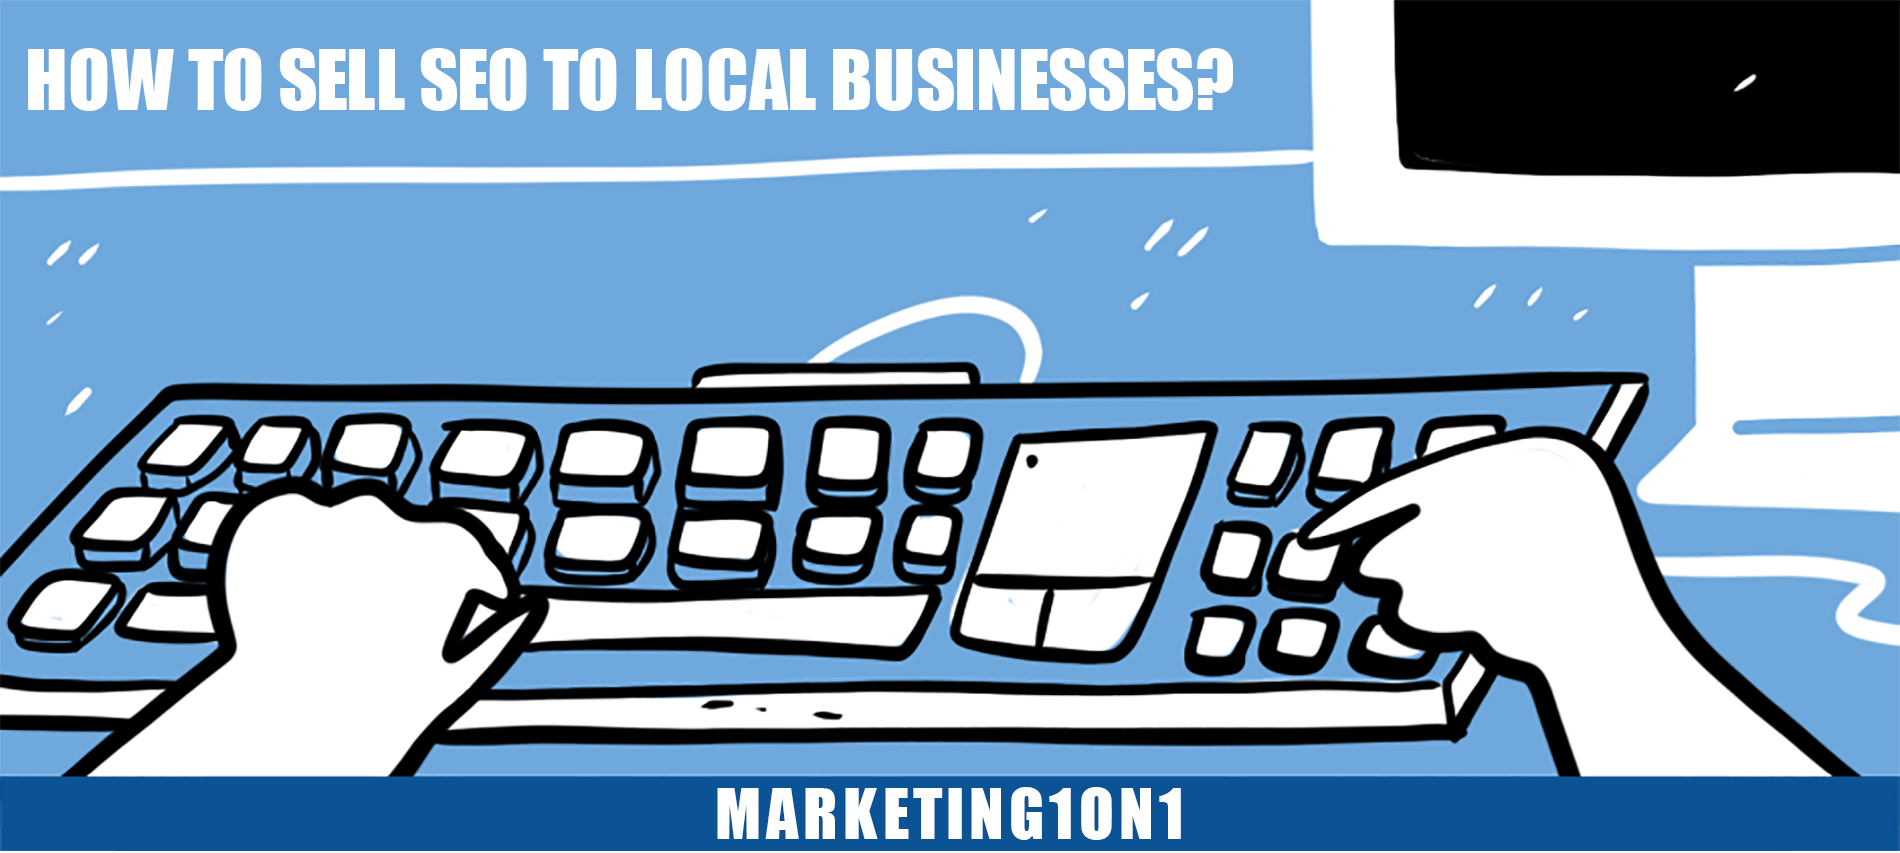 How to sell SEO to local businesses?